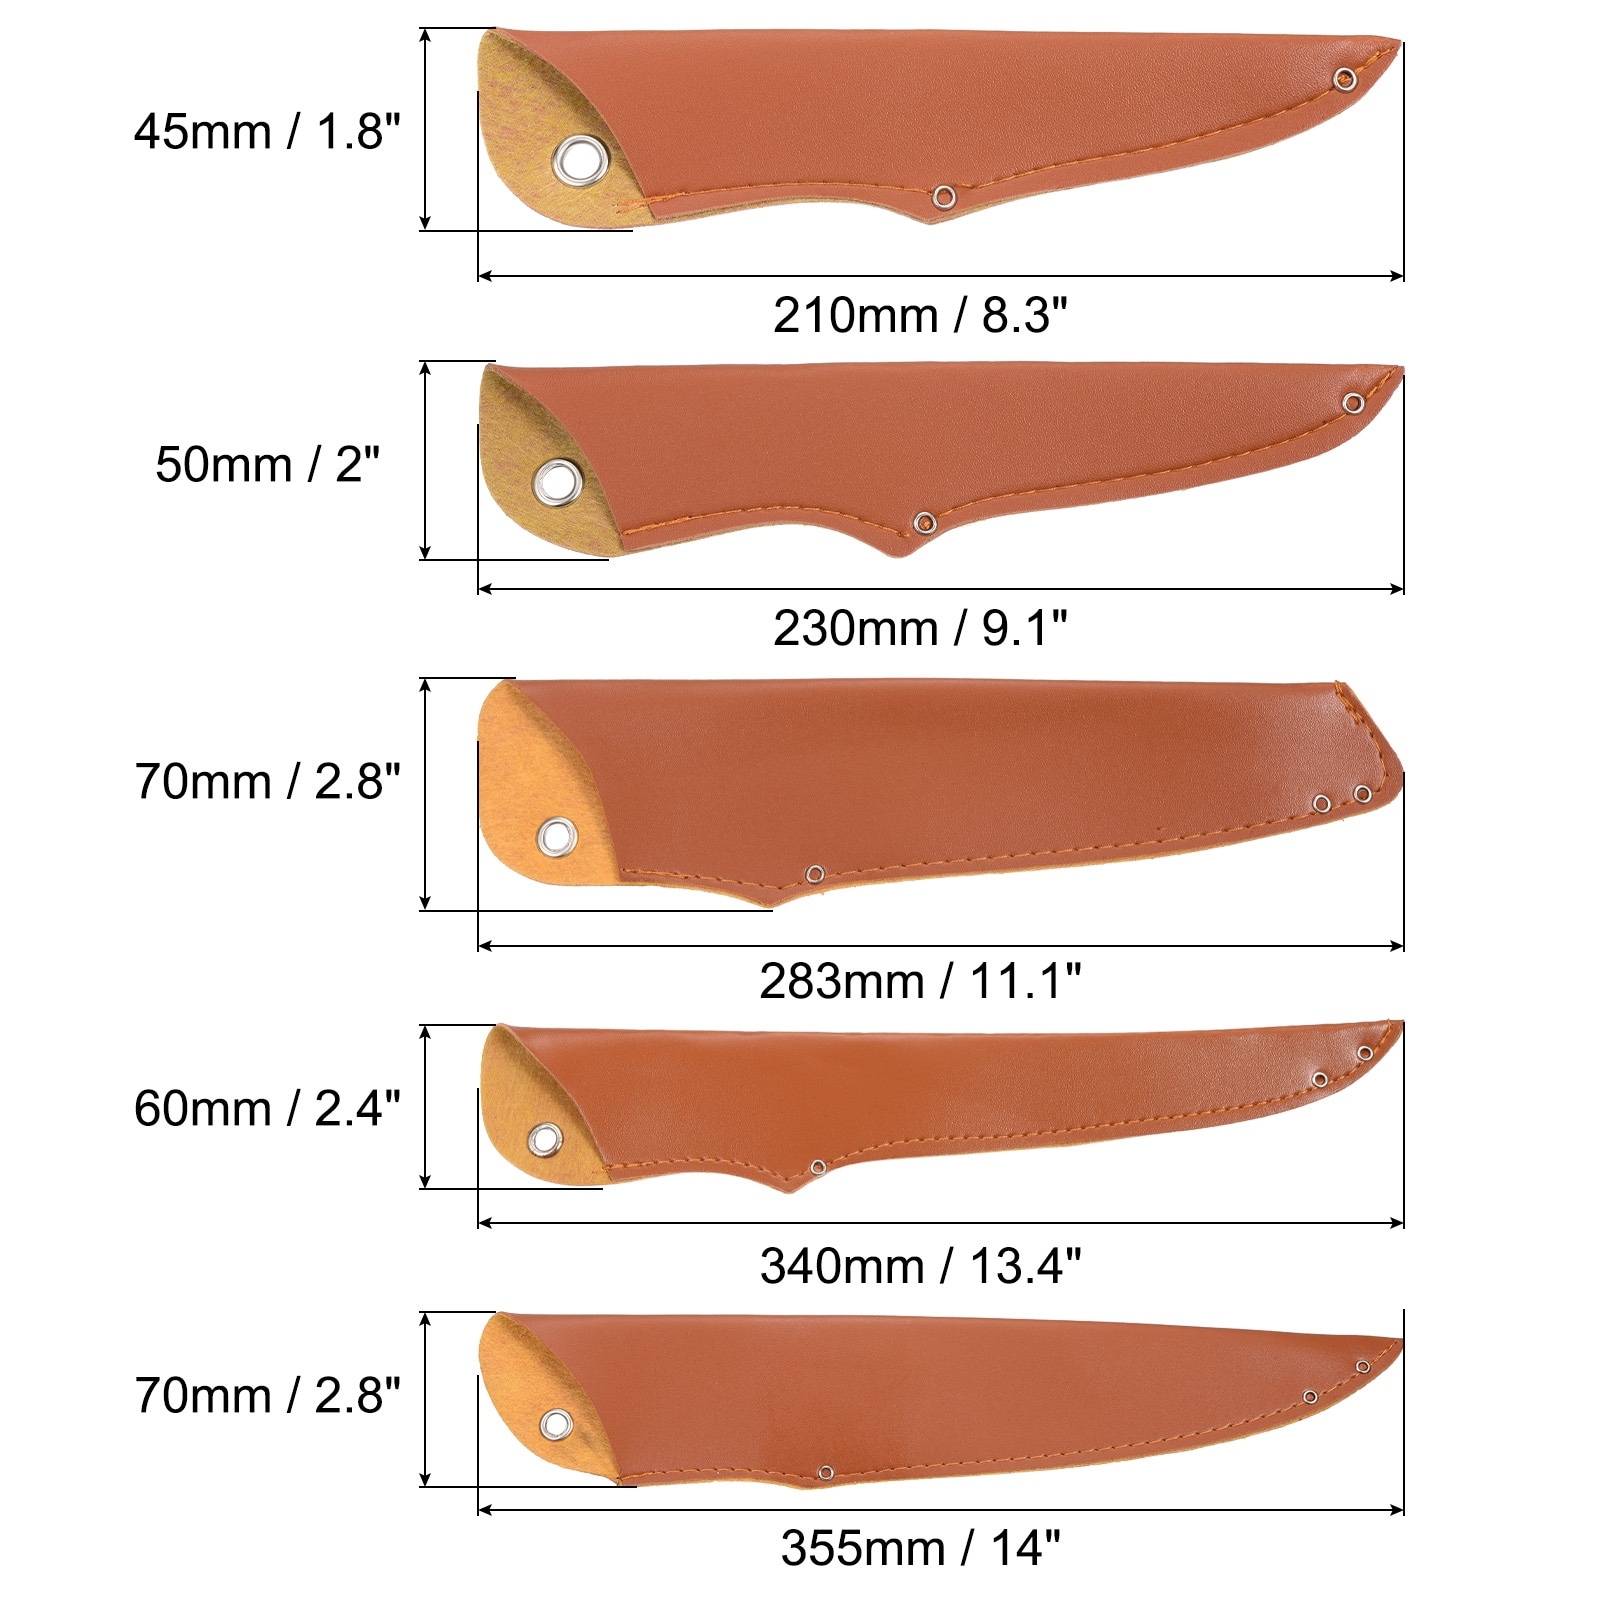 PU Leather Chef Knife Sheath, Knife Cover Sleeves for Kitchen, Brown - On  Sale - Bed Bath & Beyond - 37922215